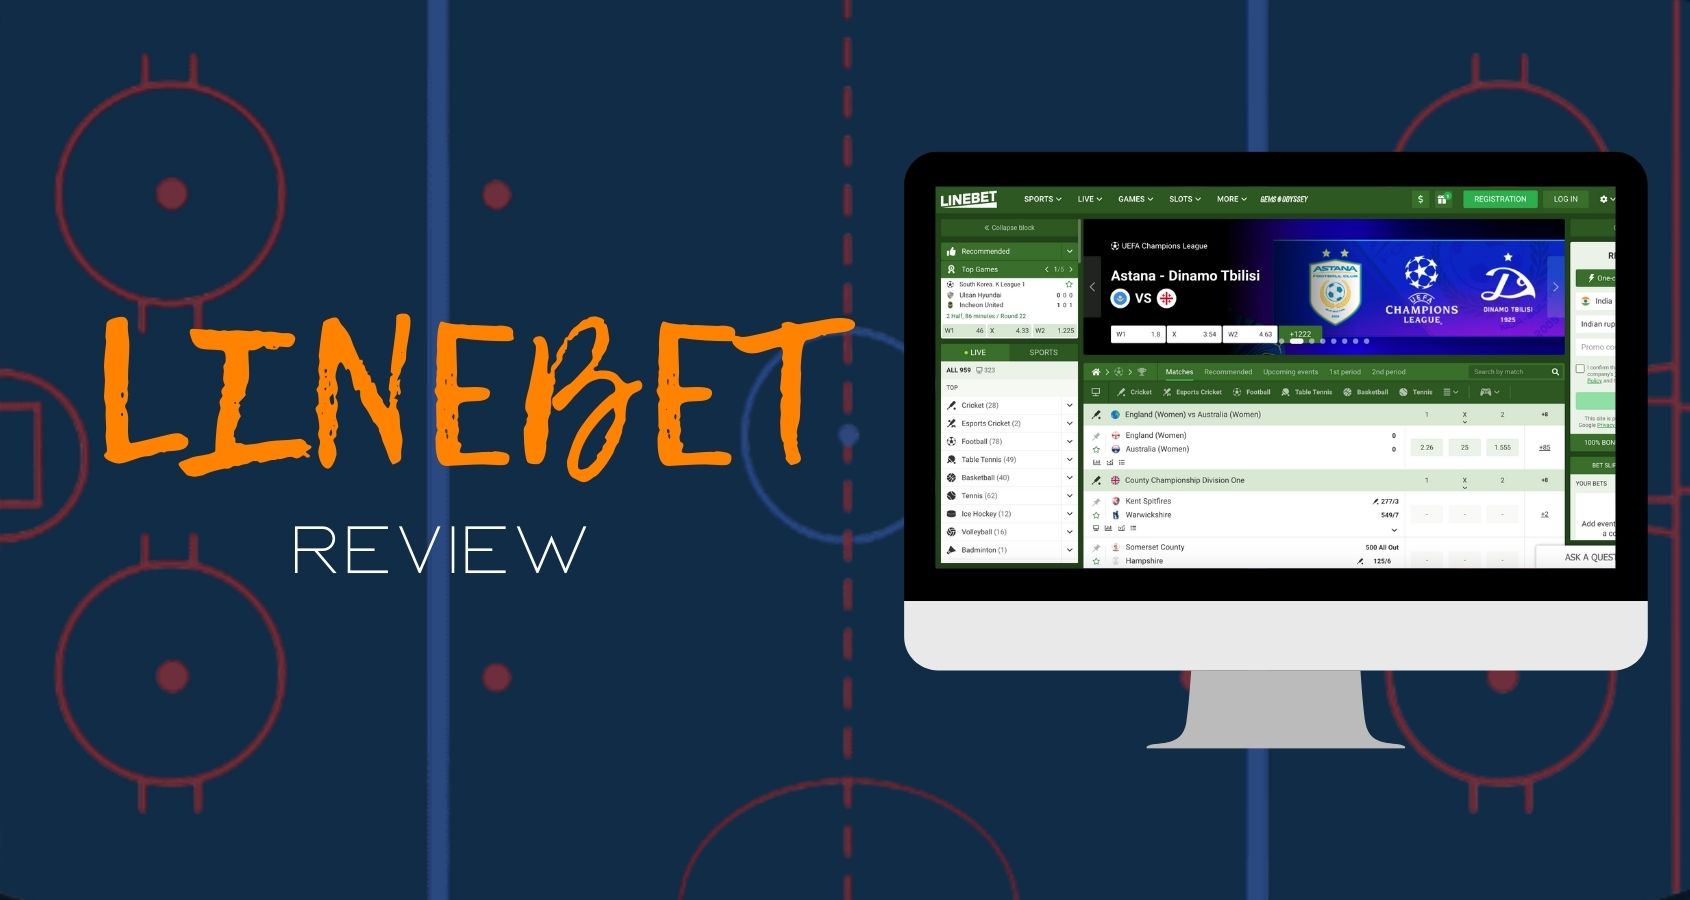 Linebet online sports betting options overview